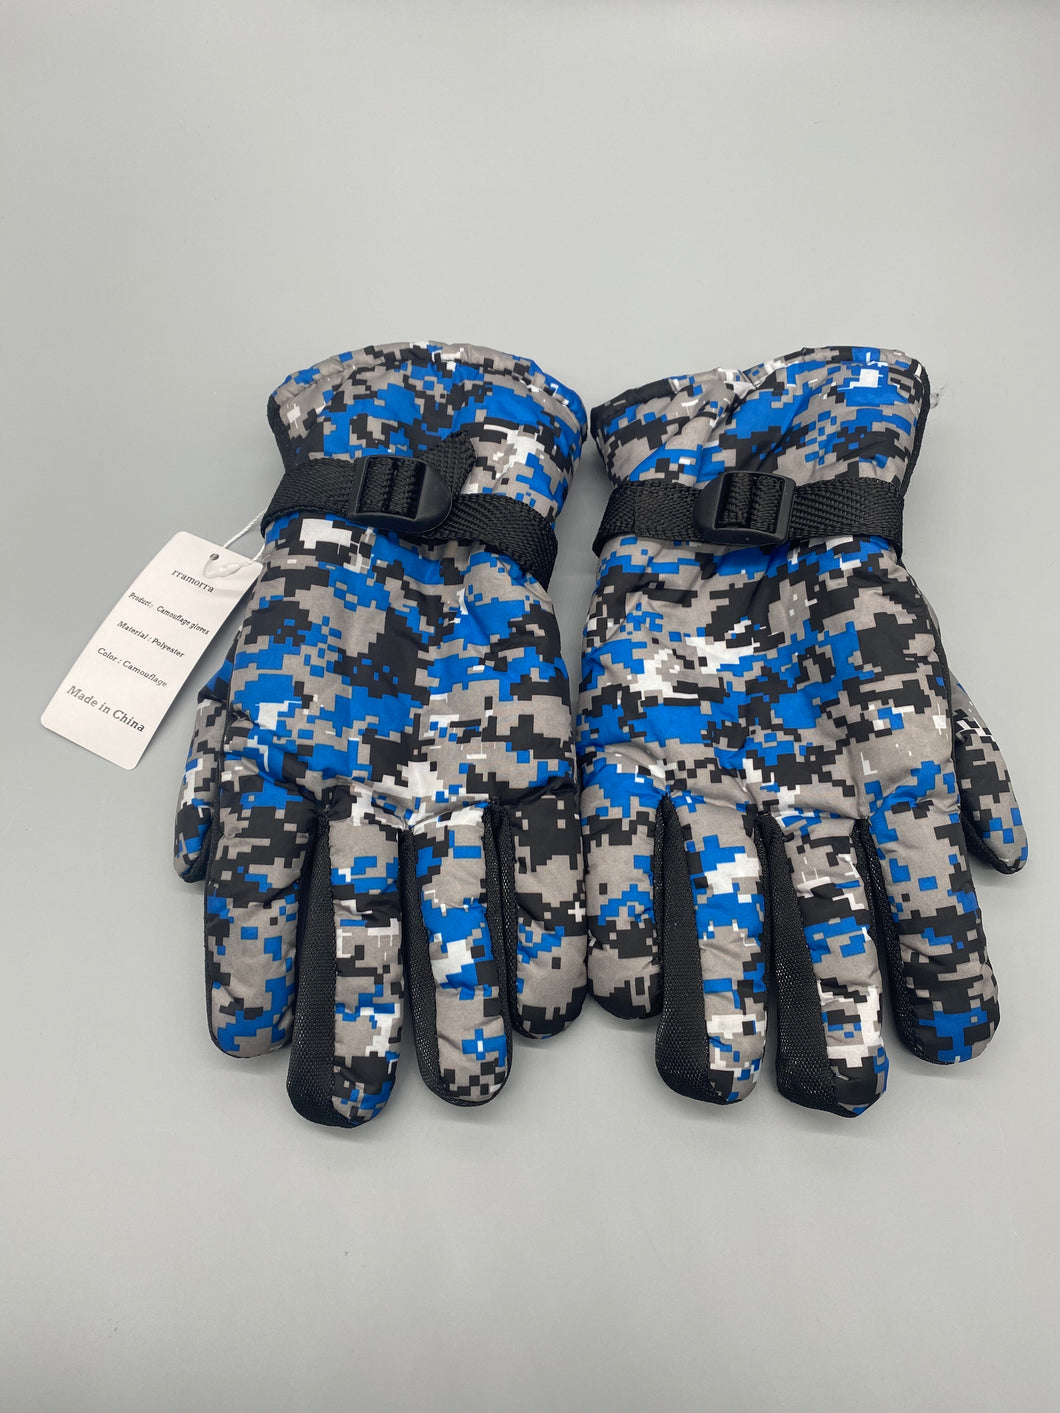 rramorra Camouflage gloves,Winter Warm Gloves,Outdoor Winter Touchscreen Warm Gloves, Water Resistant Windproof Anti-Slip Sports Gloves for Skydiving Cycling Driving Running Hiking Climbing Skiing Sports for Men＆Women.